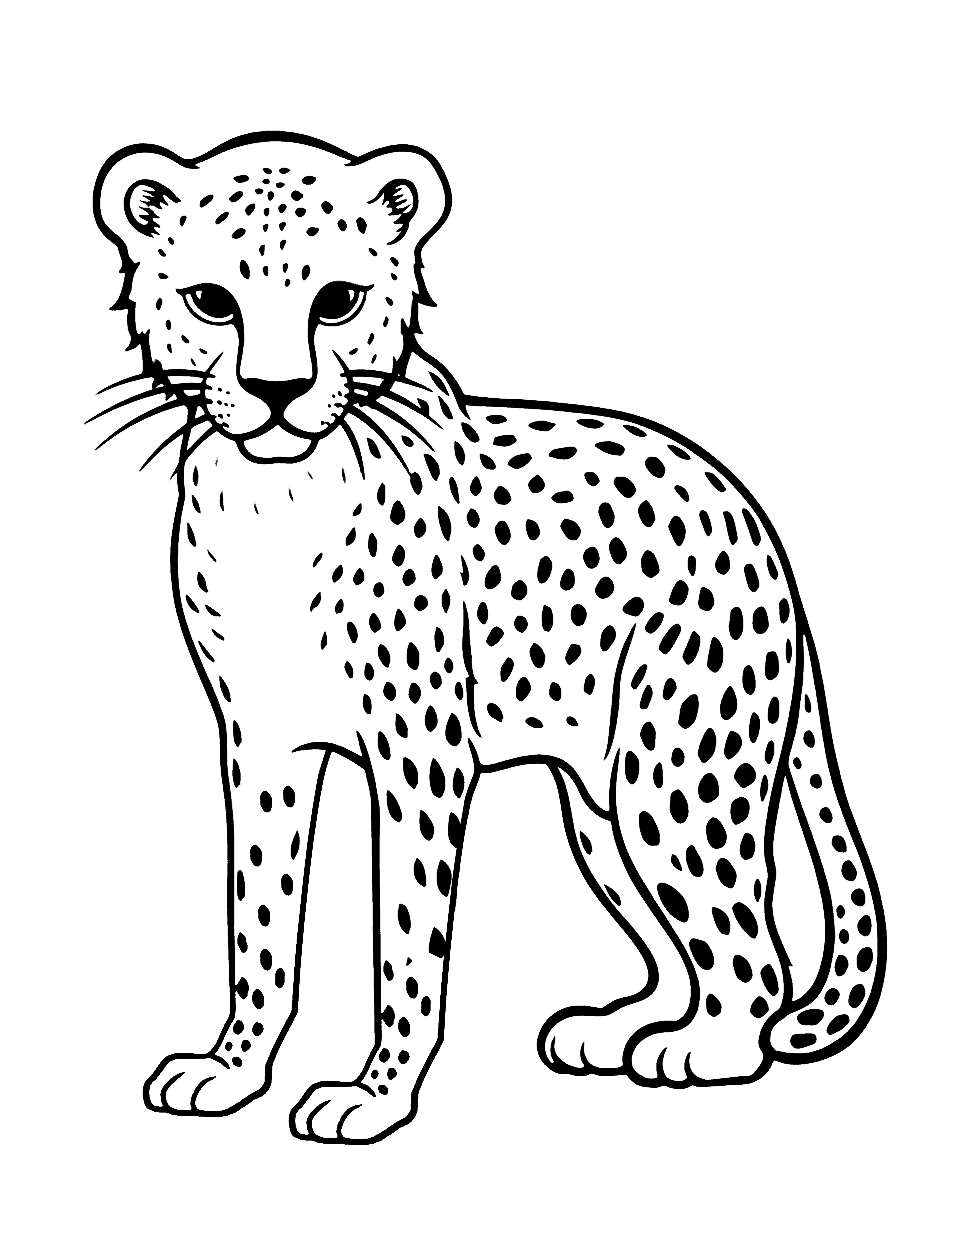 Simple Cheetah for Beginners Coloring Page - An easy-to-color cheetah, suitable for preschoolers, with fewer details.